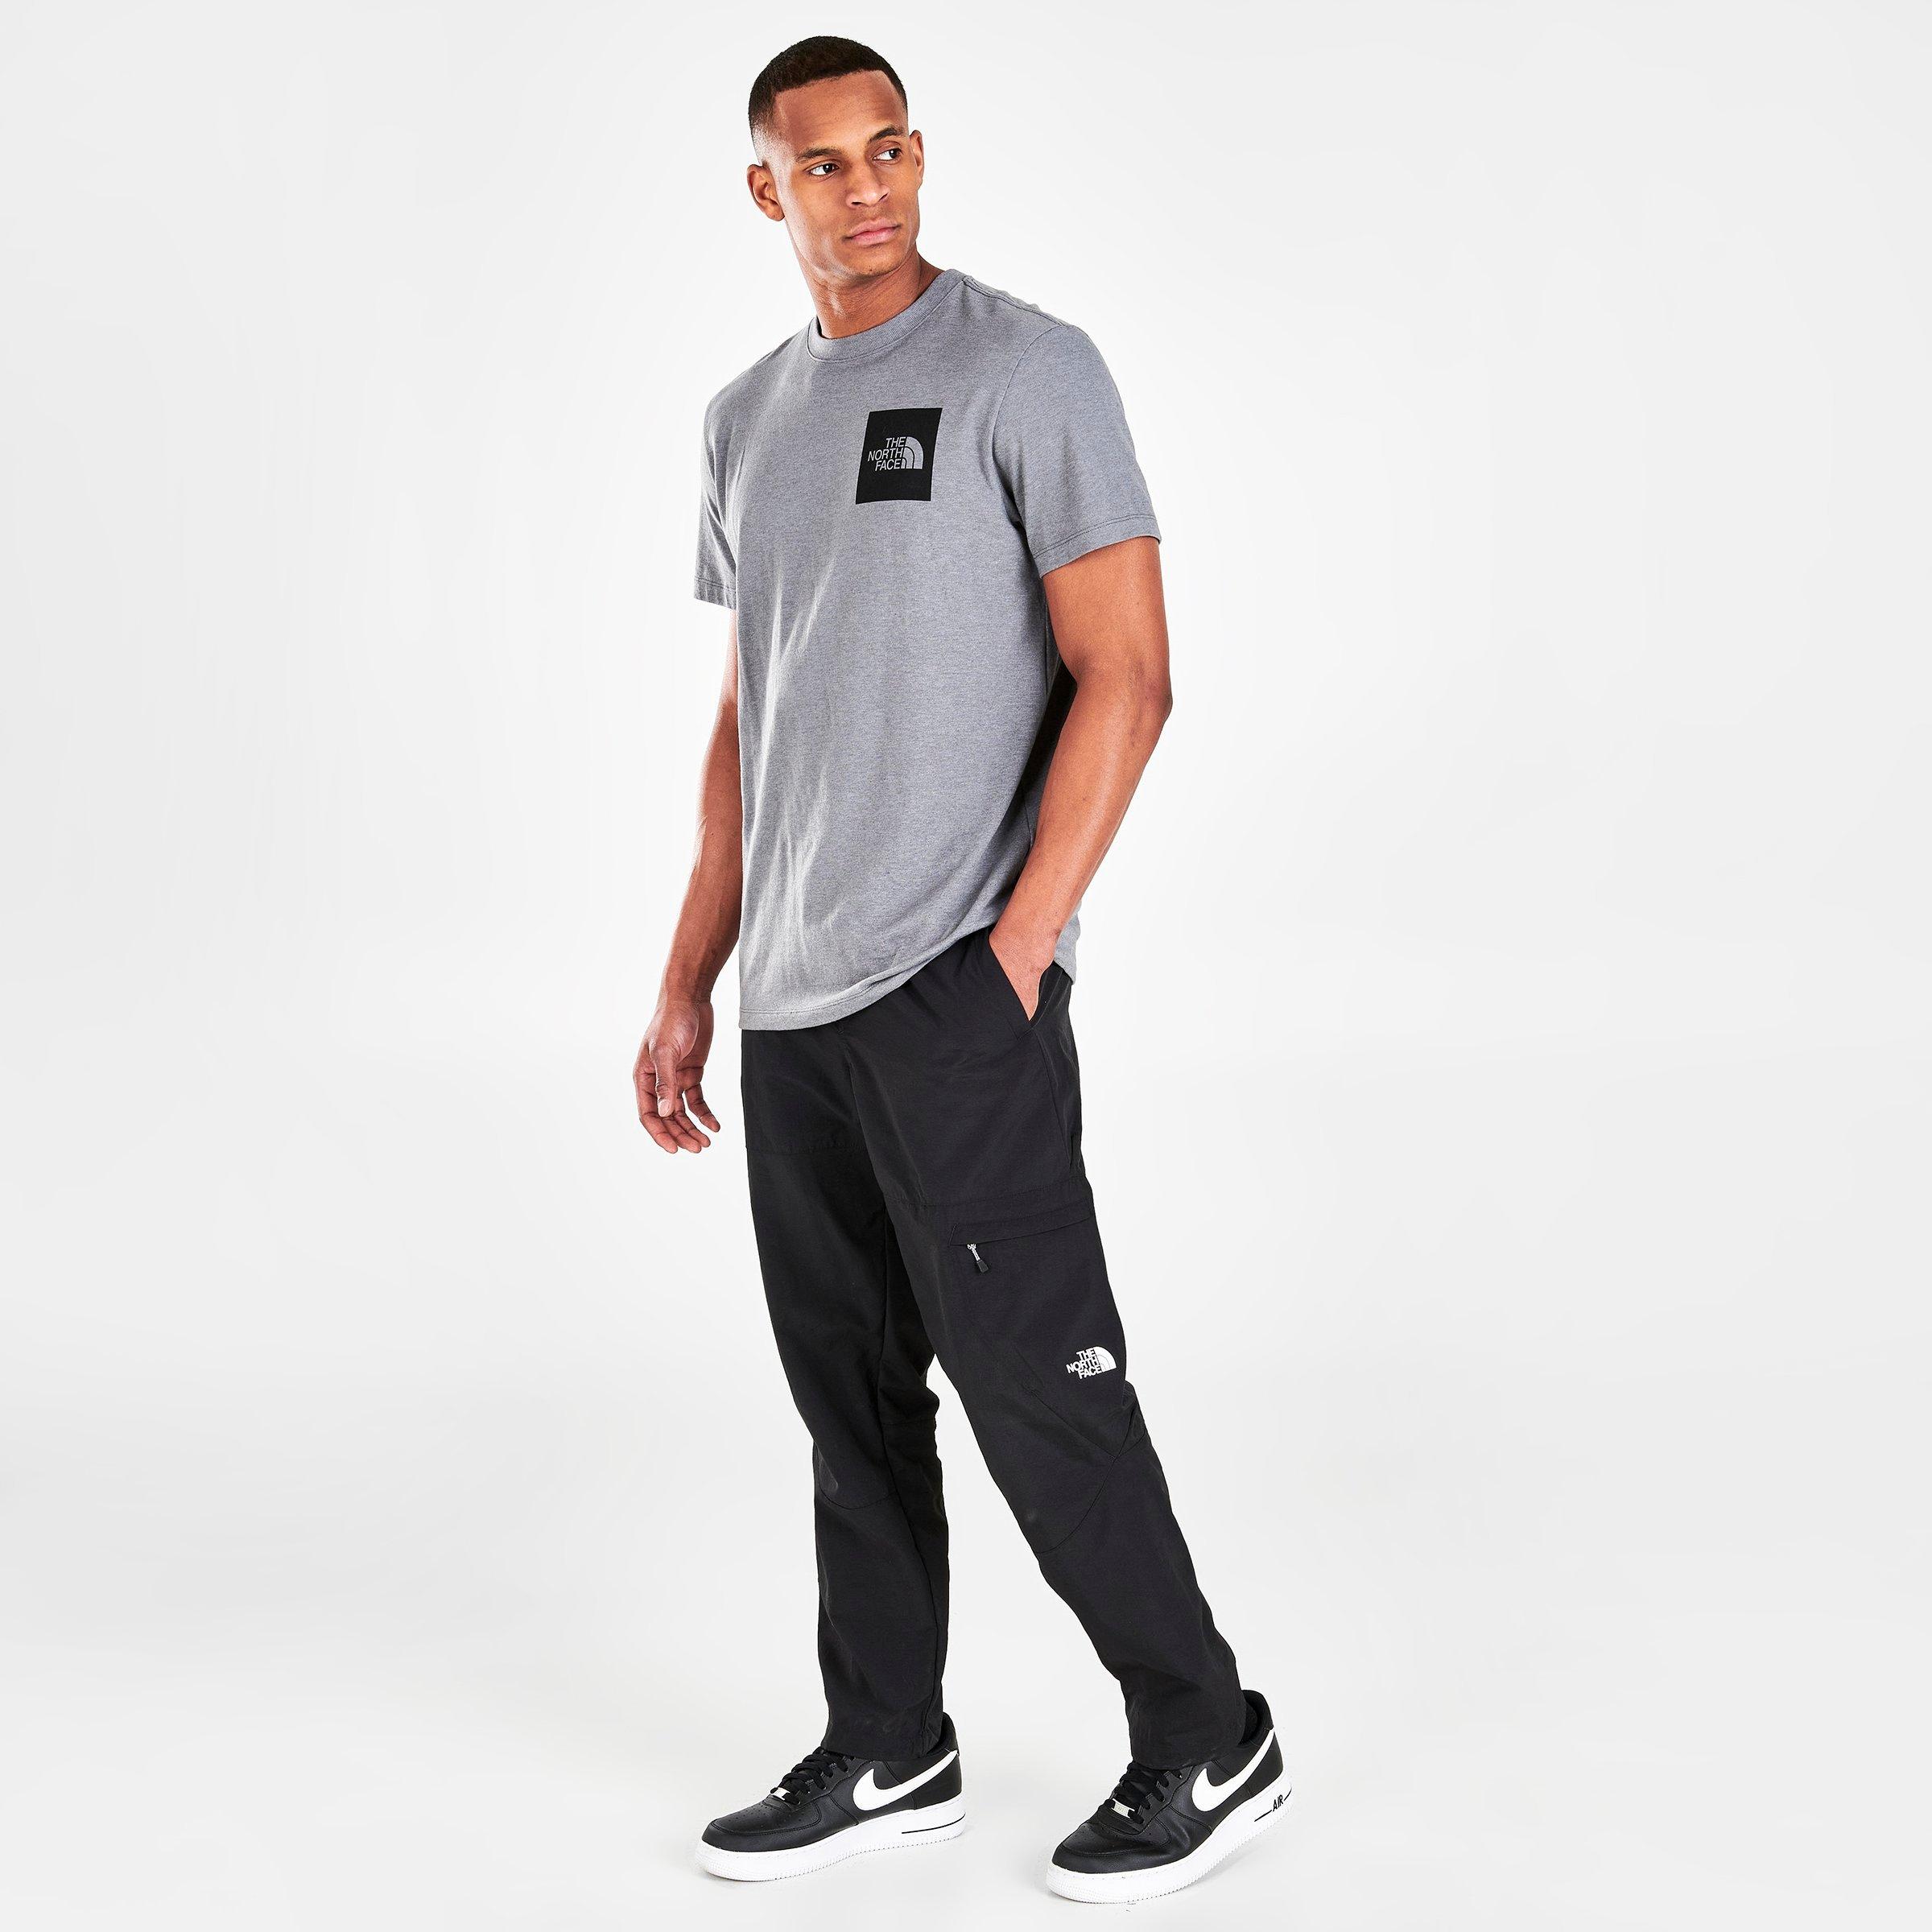 jd north face trousers